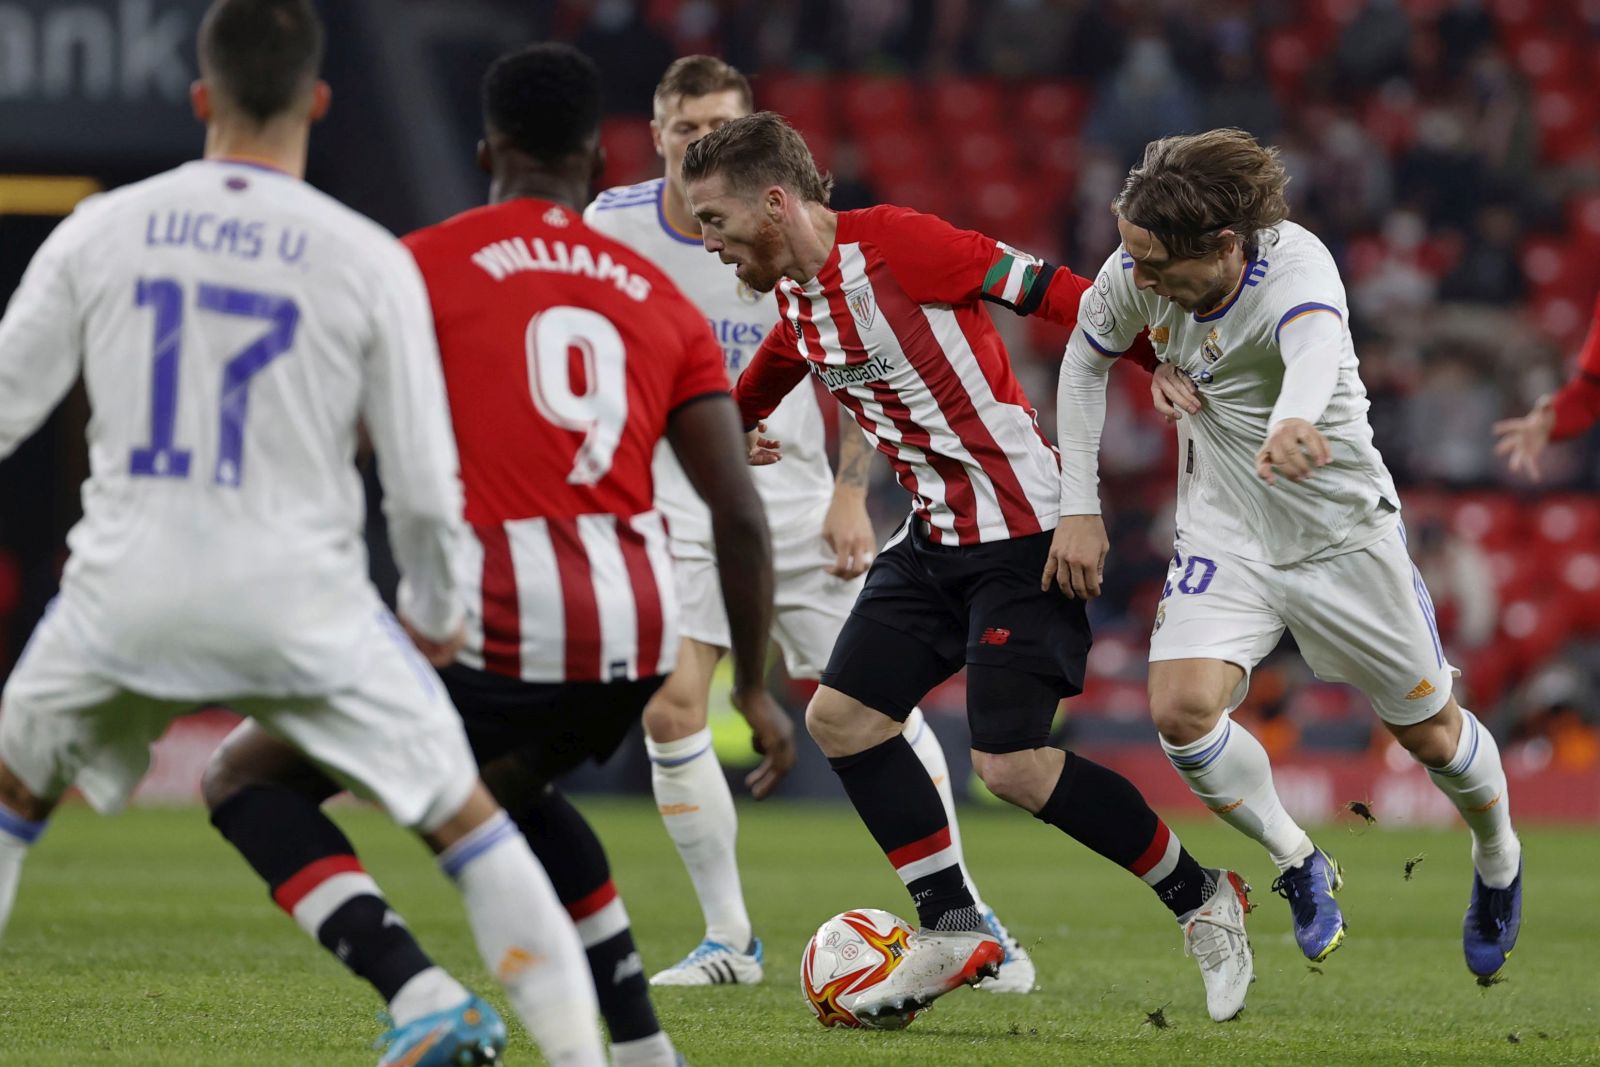 epa09725967 Bilbao's Iker Muniain (2-R) in action against Real Madrid's Luka Modric (R) during the Spanish King's Cup quarter final soccer match between Athletic Bilbao and Real Madrid in Bilbao, northern Spain, 03 February 2022.  EPA/Luis Tejido